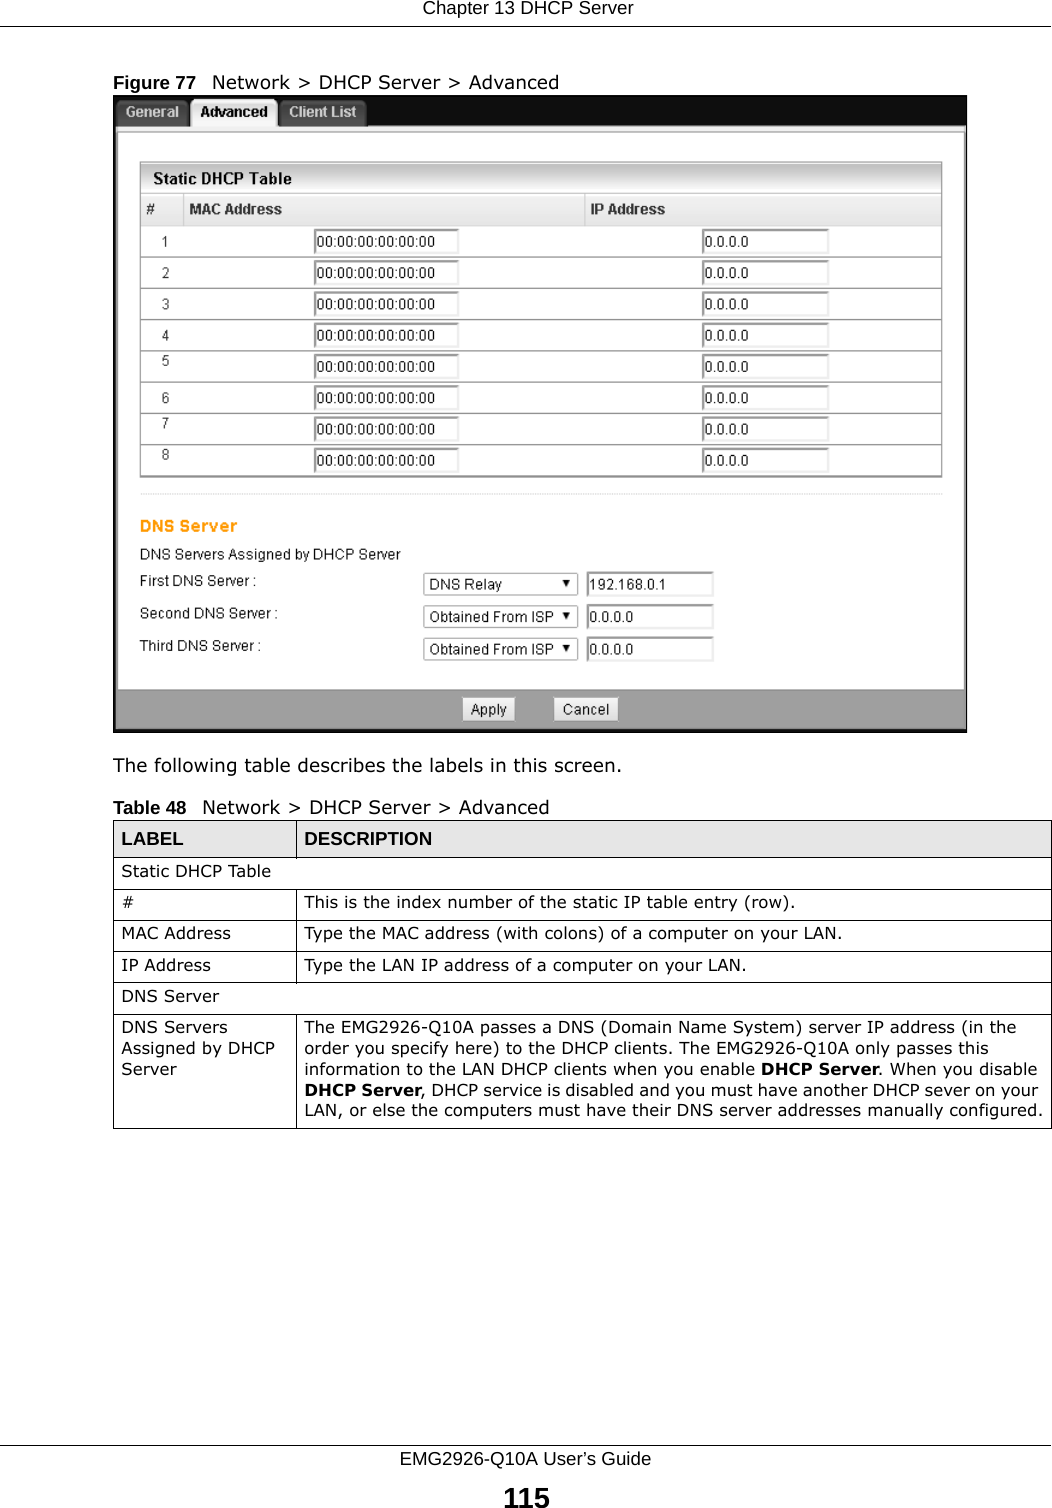  Chapter 13 DHCP ServerEMG2926-Q10A User’s Guide115Figure 77   Network &gt; DHCP Server &gt; Advanced The following table describes the labels in this screen.Table 48   Network &gt; DHCP Server &gt; AdvancedLABEL DESCRIPTIONStatic DHCP Table# This is the index number of the static IP table entry (row).MAC Address Type the MAC address (with colons) of a computer on your LAN.IP Address Type the LAN IP address of a computer on your LAN.DNS ServerDNS Servers Assigned by DHCP Server The EMG2926-Q10A passes a DNS (Domain Name System) server IP address (in the order you specify here) to the DHCP clients. The EMG2926-Q10A only passes this information to the LAN DHCP clients when you enable DHCP Server. When you disable DHCP Server, DHCP service is disabled and you must have another DHCP sever on your LAN, or else the computers must have their DNS server addresses manually configured.